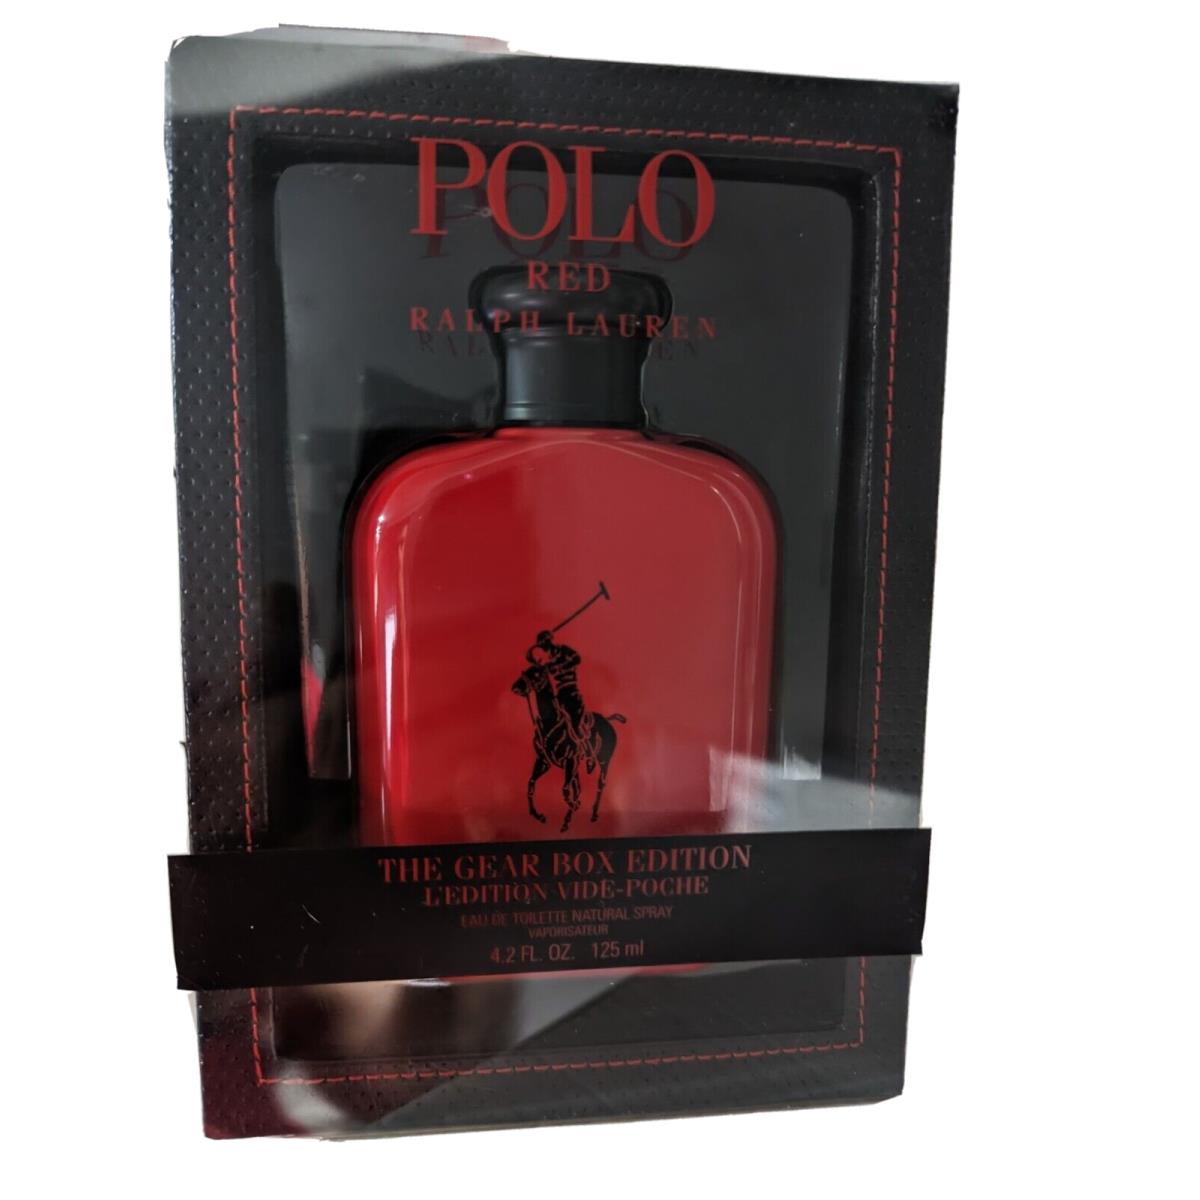 Polo Red Cologne Perfume Ralph Lauren 4.2 Oz 125 ml Edt Spray Men The Gear Box - Red